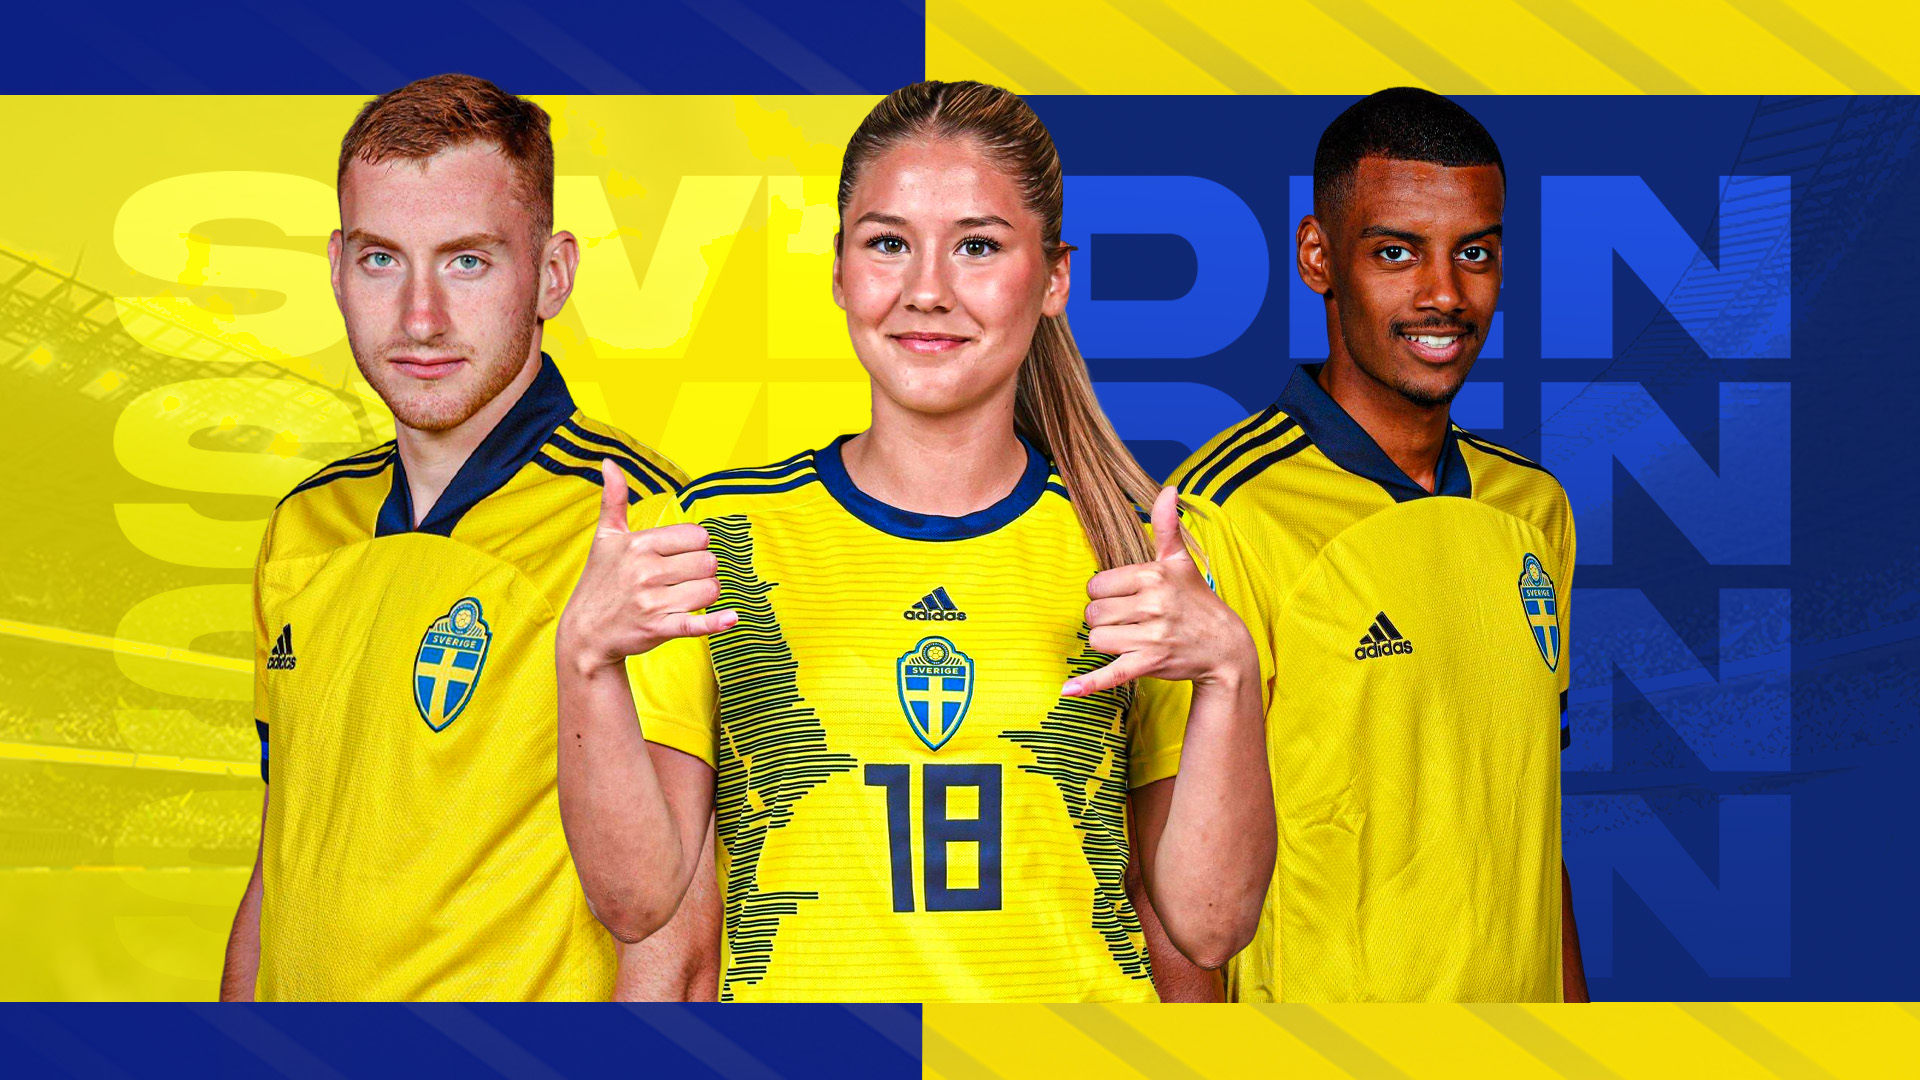 Sweden men’s and/or women’s national football teams’ sponsors / brand partners